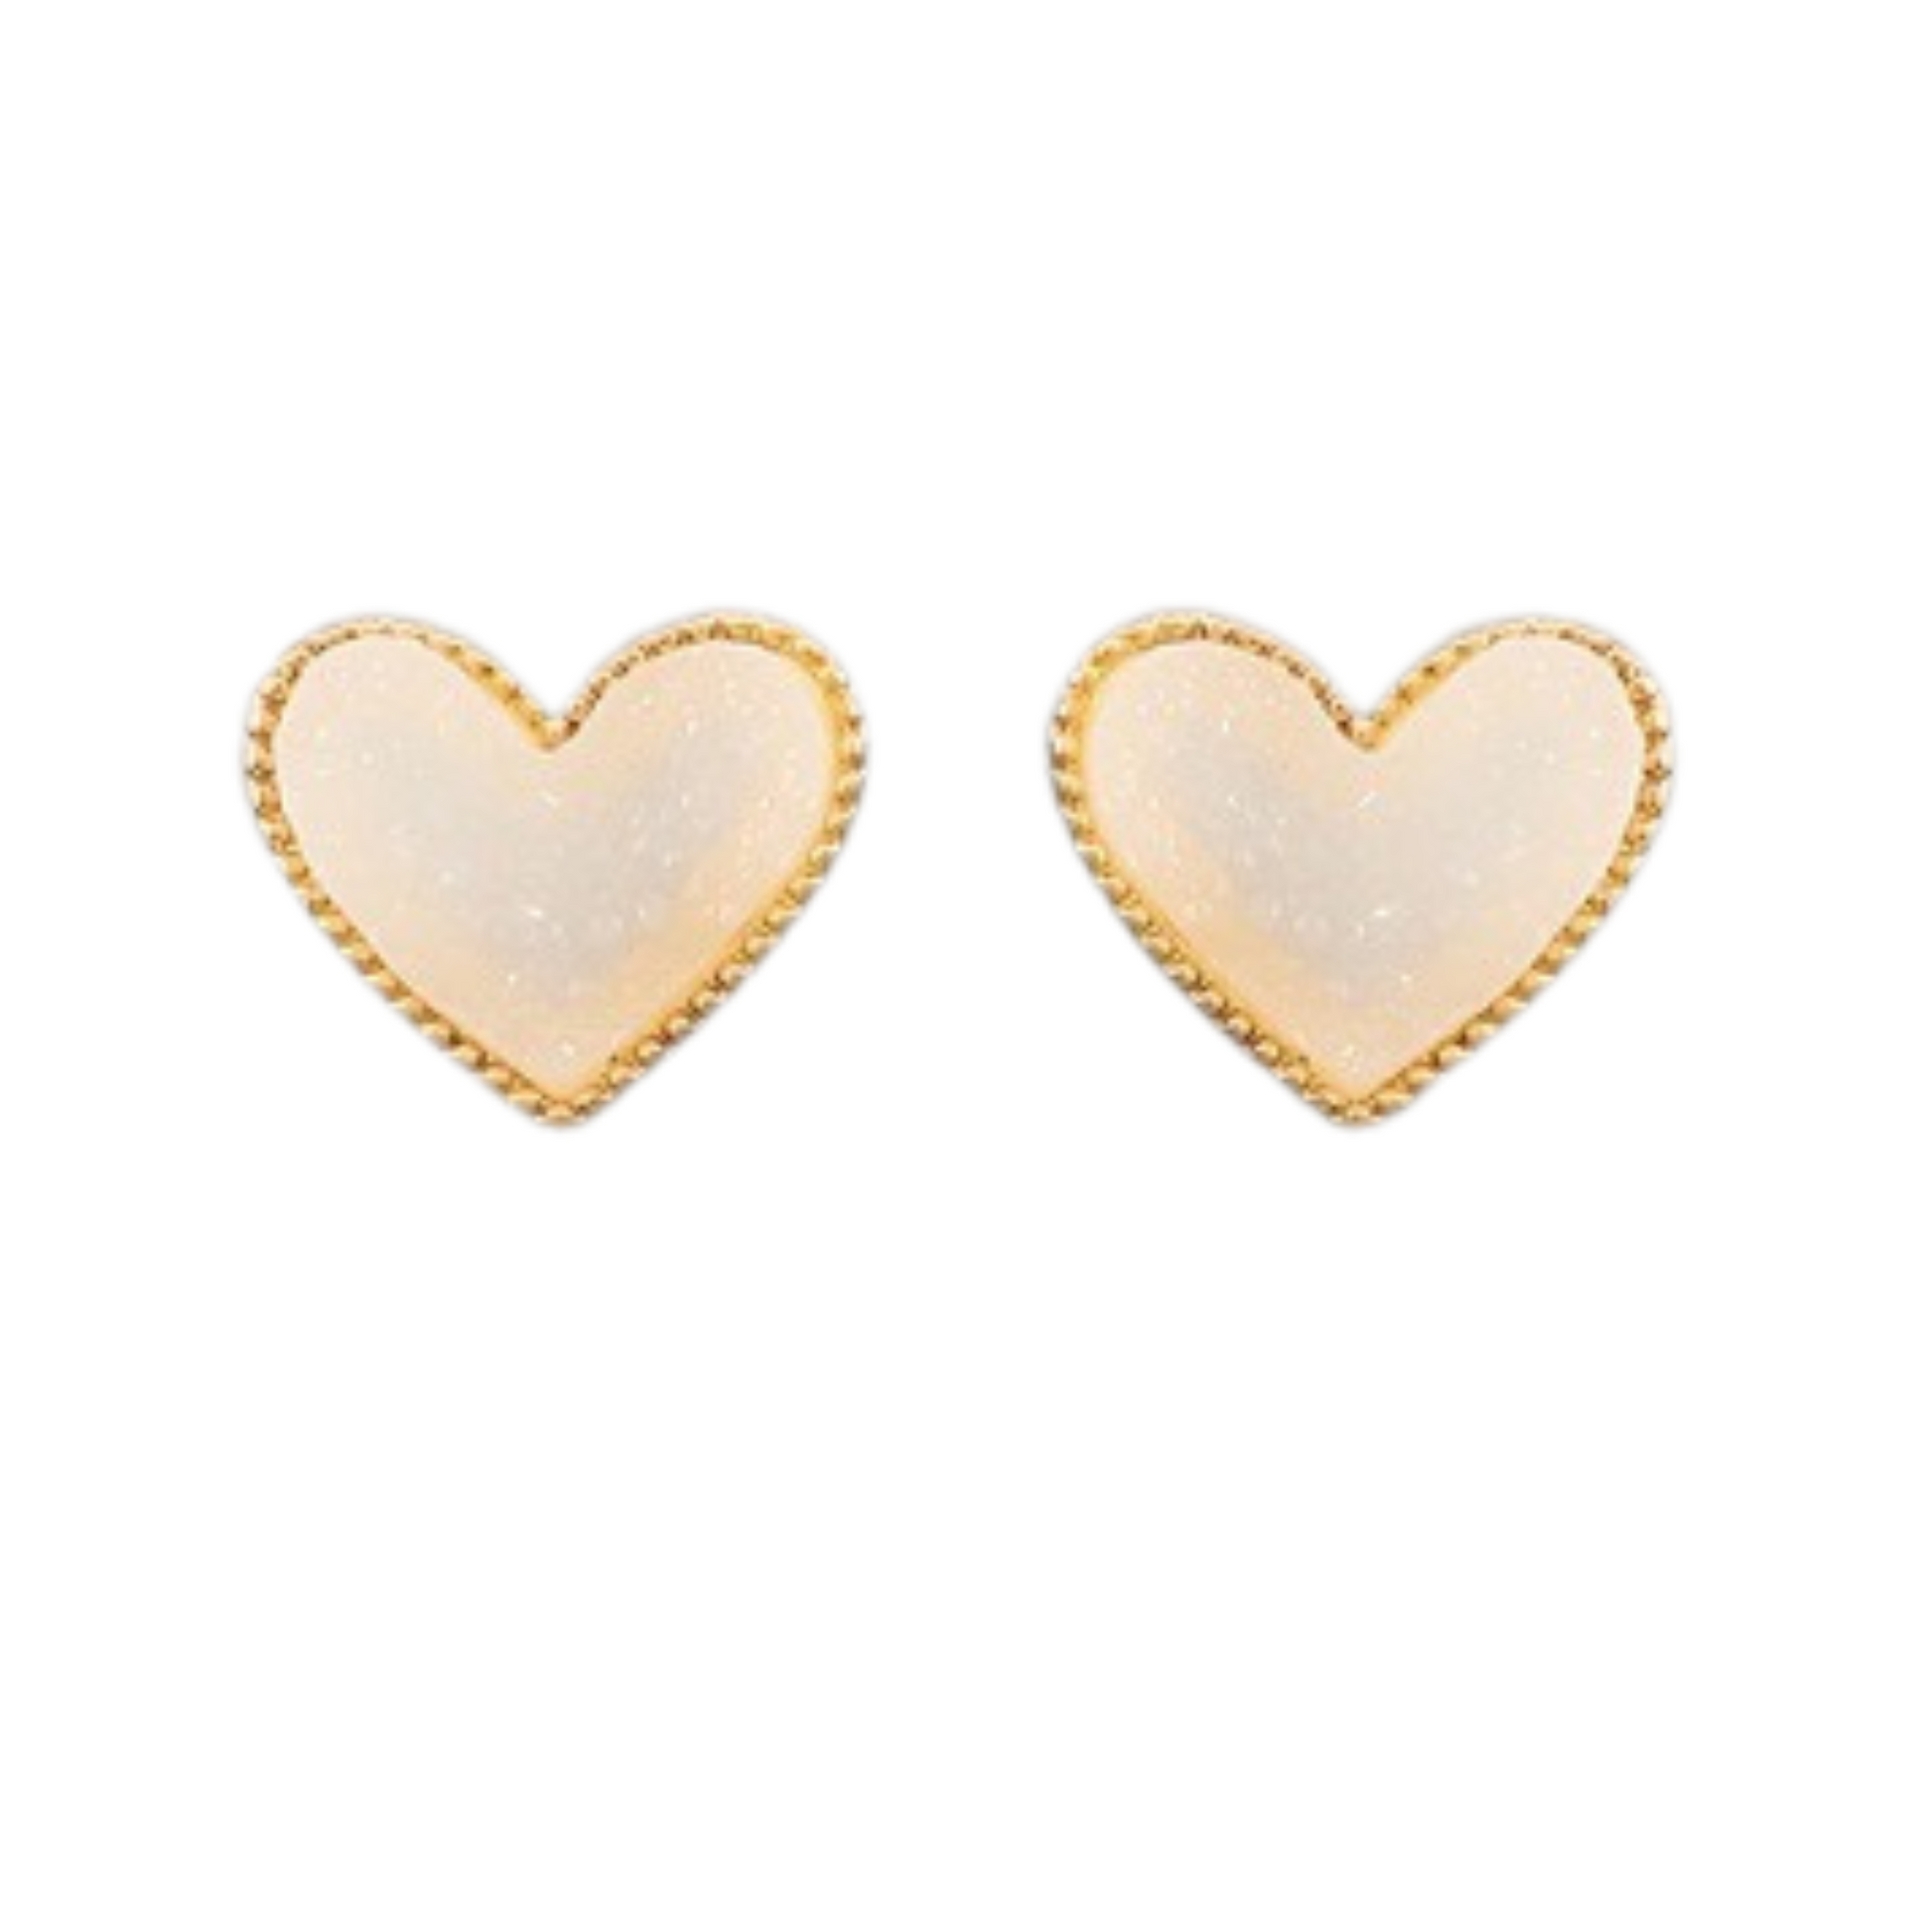 These Druzy Heart Earrings feature a white color and a beautiful heart shape. Made with stud earrings, they add a touch of elegance and charm to any outfit. Made from high quality materials, they are sure to make a statement and elevate your style.